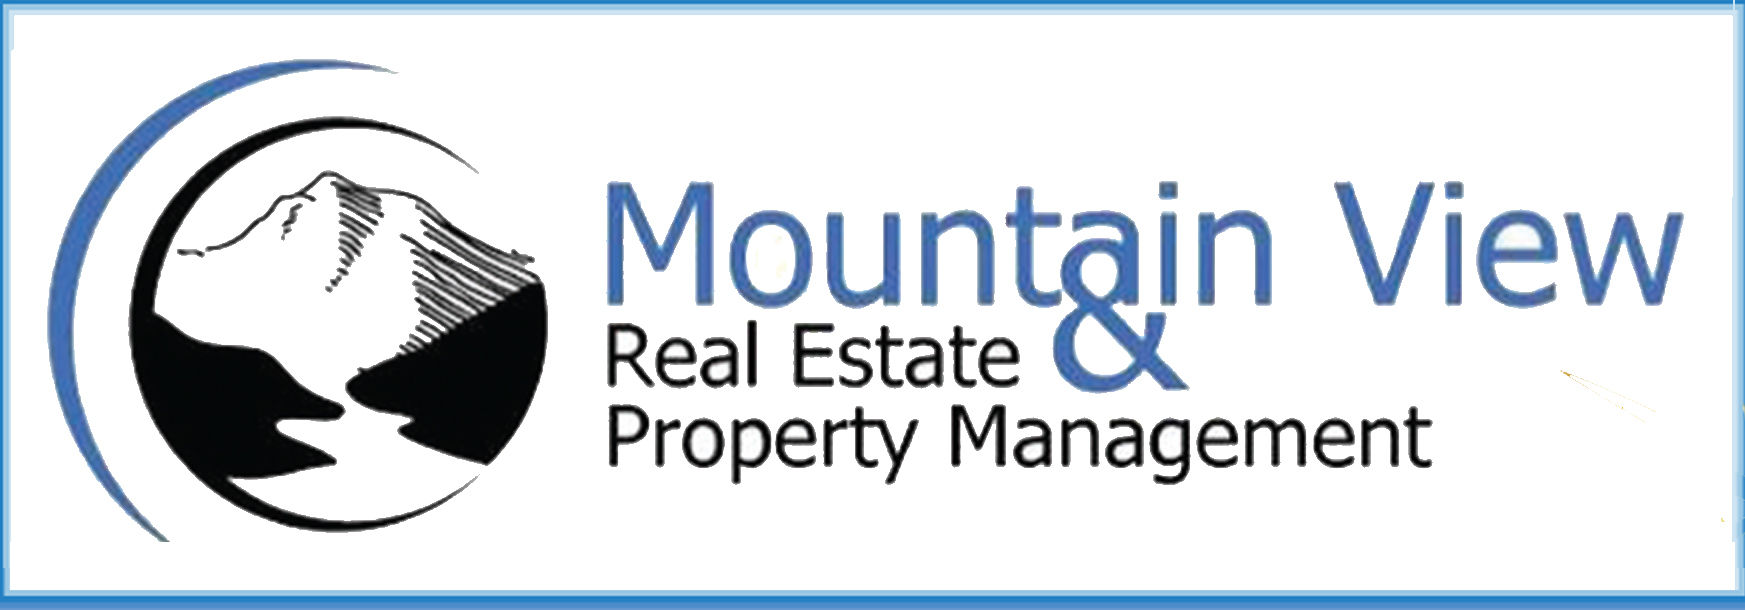 Mountain View Real Estate &amp; PM